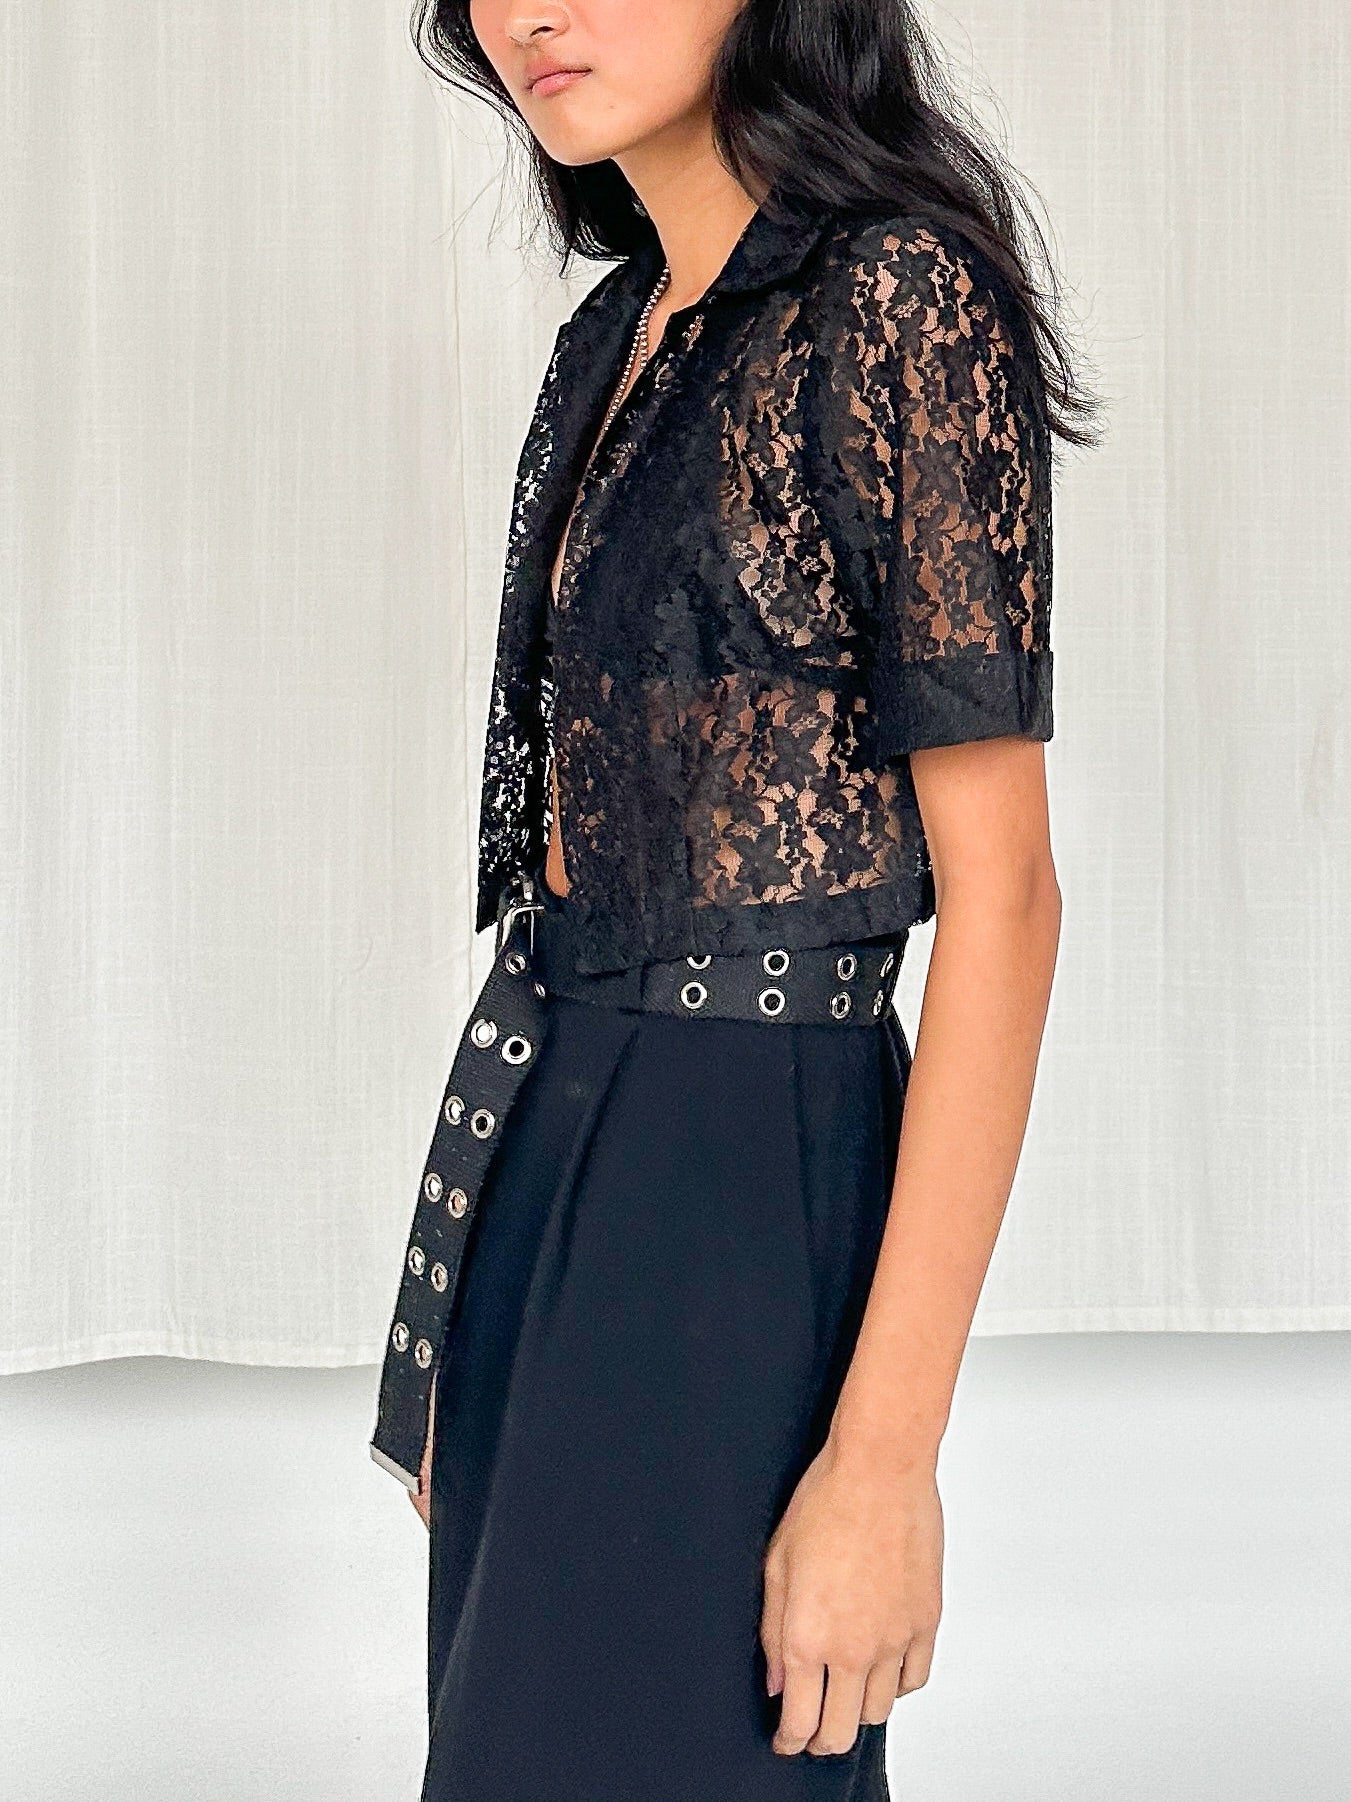 Black Sheer Lace Cropped Cardigan (S) - 2